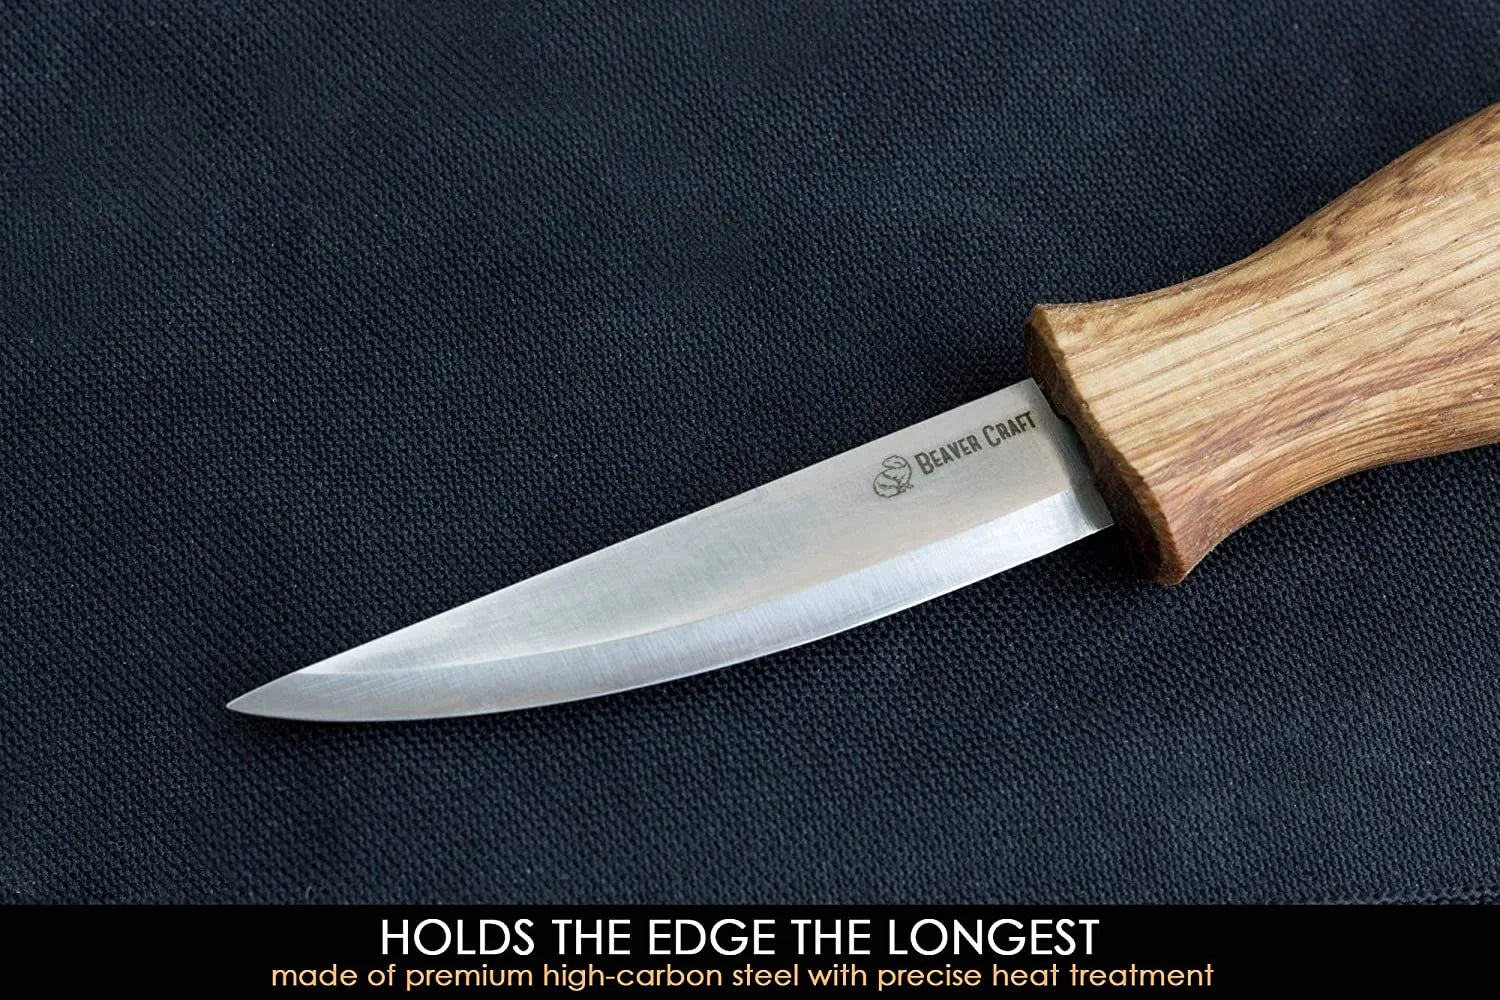 BeaverCraft Sloyd Knife C4 3.14 inch Wood Carving Sloyd Knife for Whittling and Roughing for Beginners and Profi - Durable High Carbon Steel - Spoon